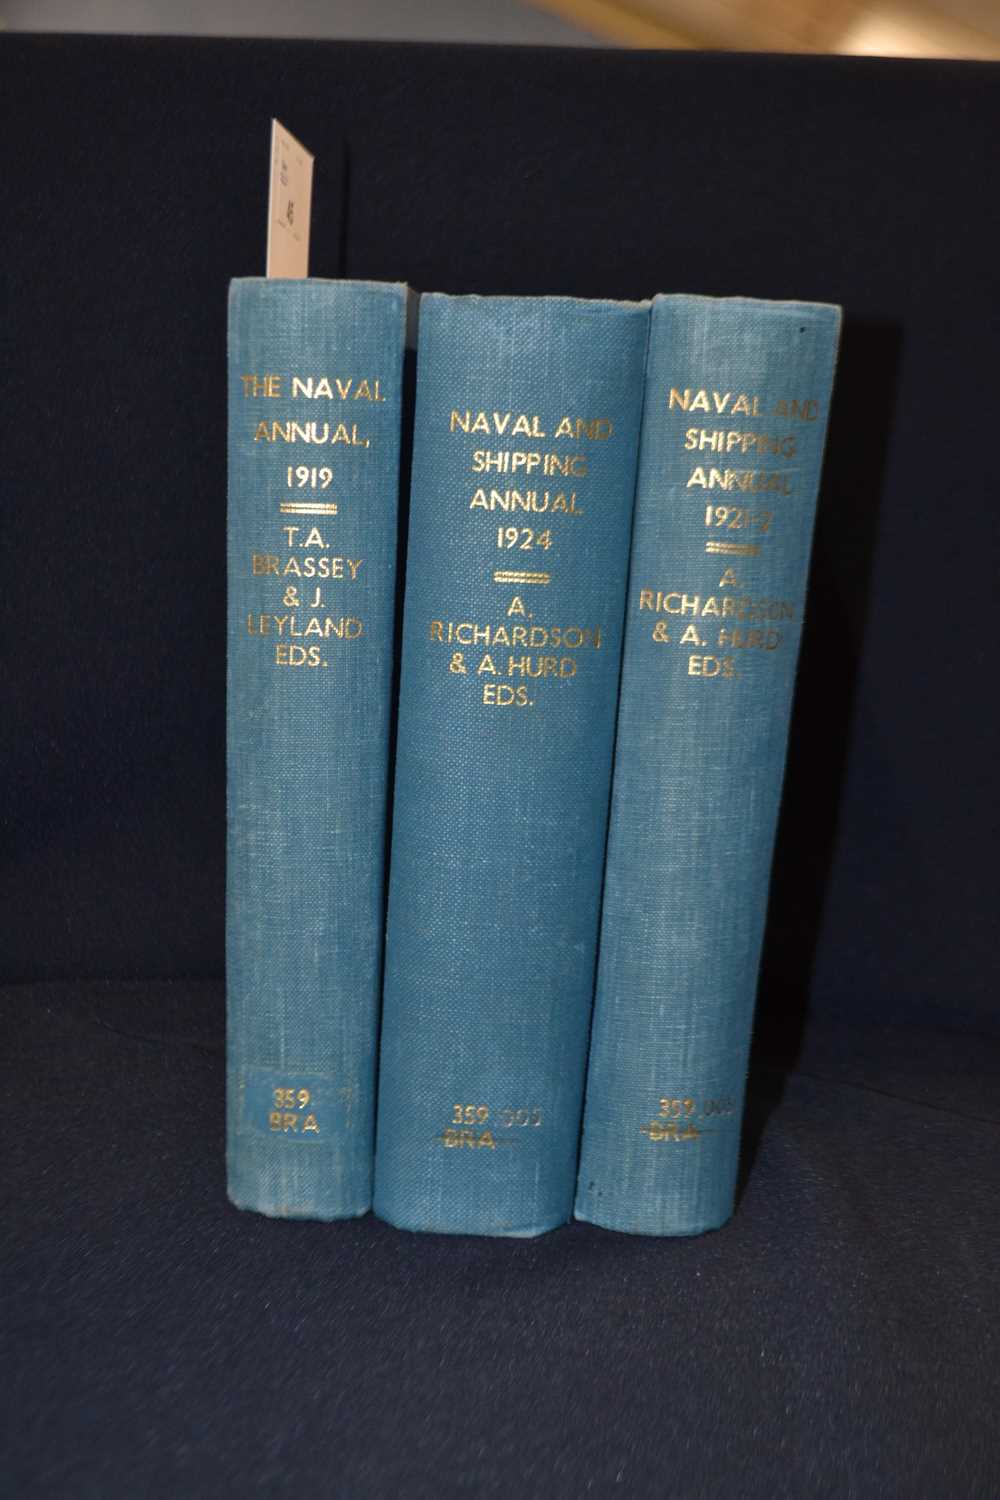 A RICHARDSON AND A HURD: THE NAVAL AND SHIPPING ANNUAL, 3 volumes.1919, 1921-22, 1924. London,